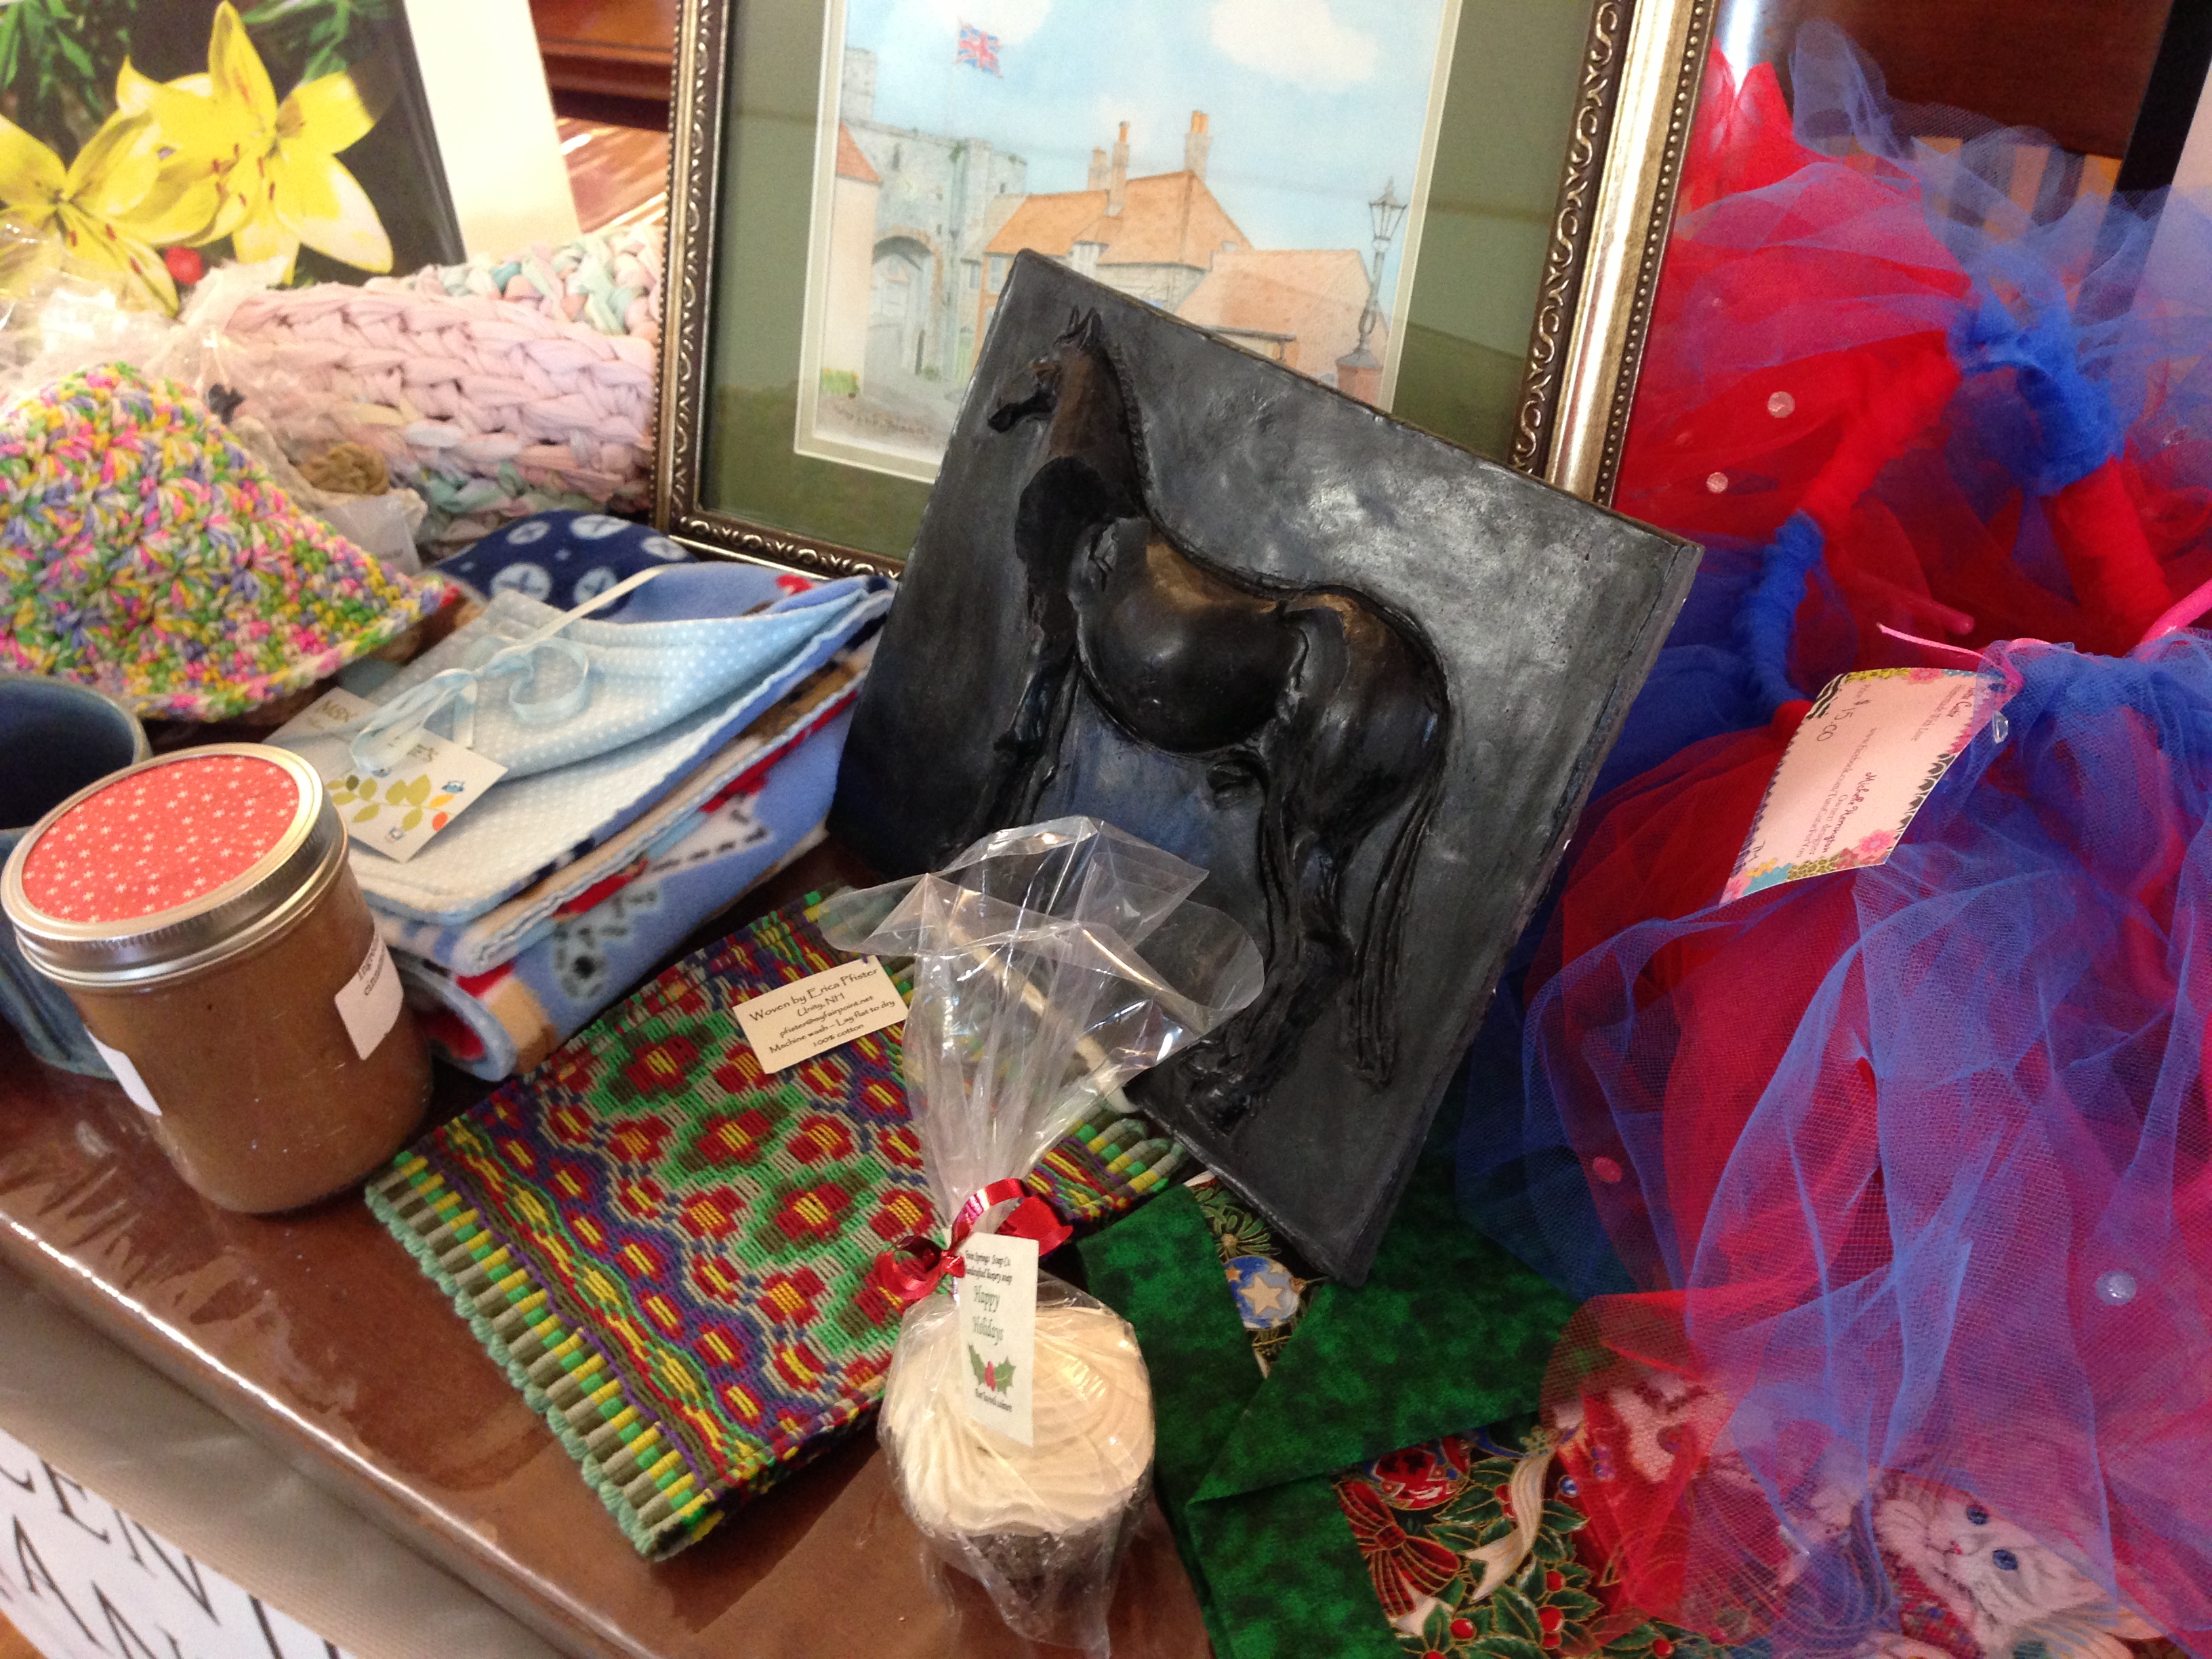 Items donated by participants of the Local Arts Fair for WCCMA's Raffle.